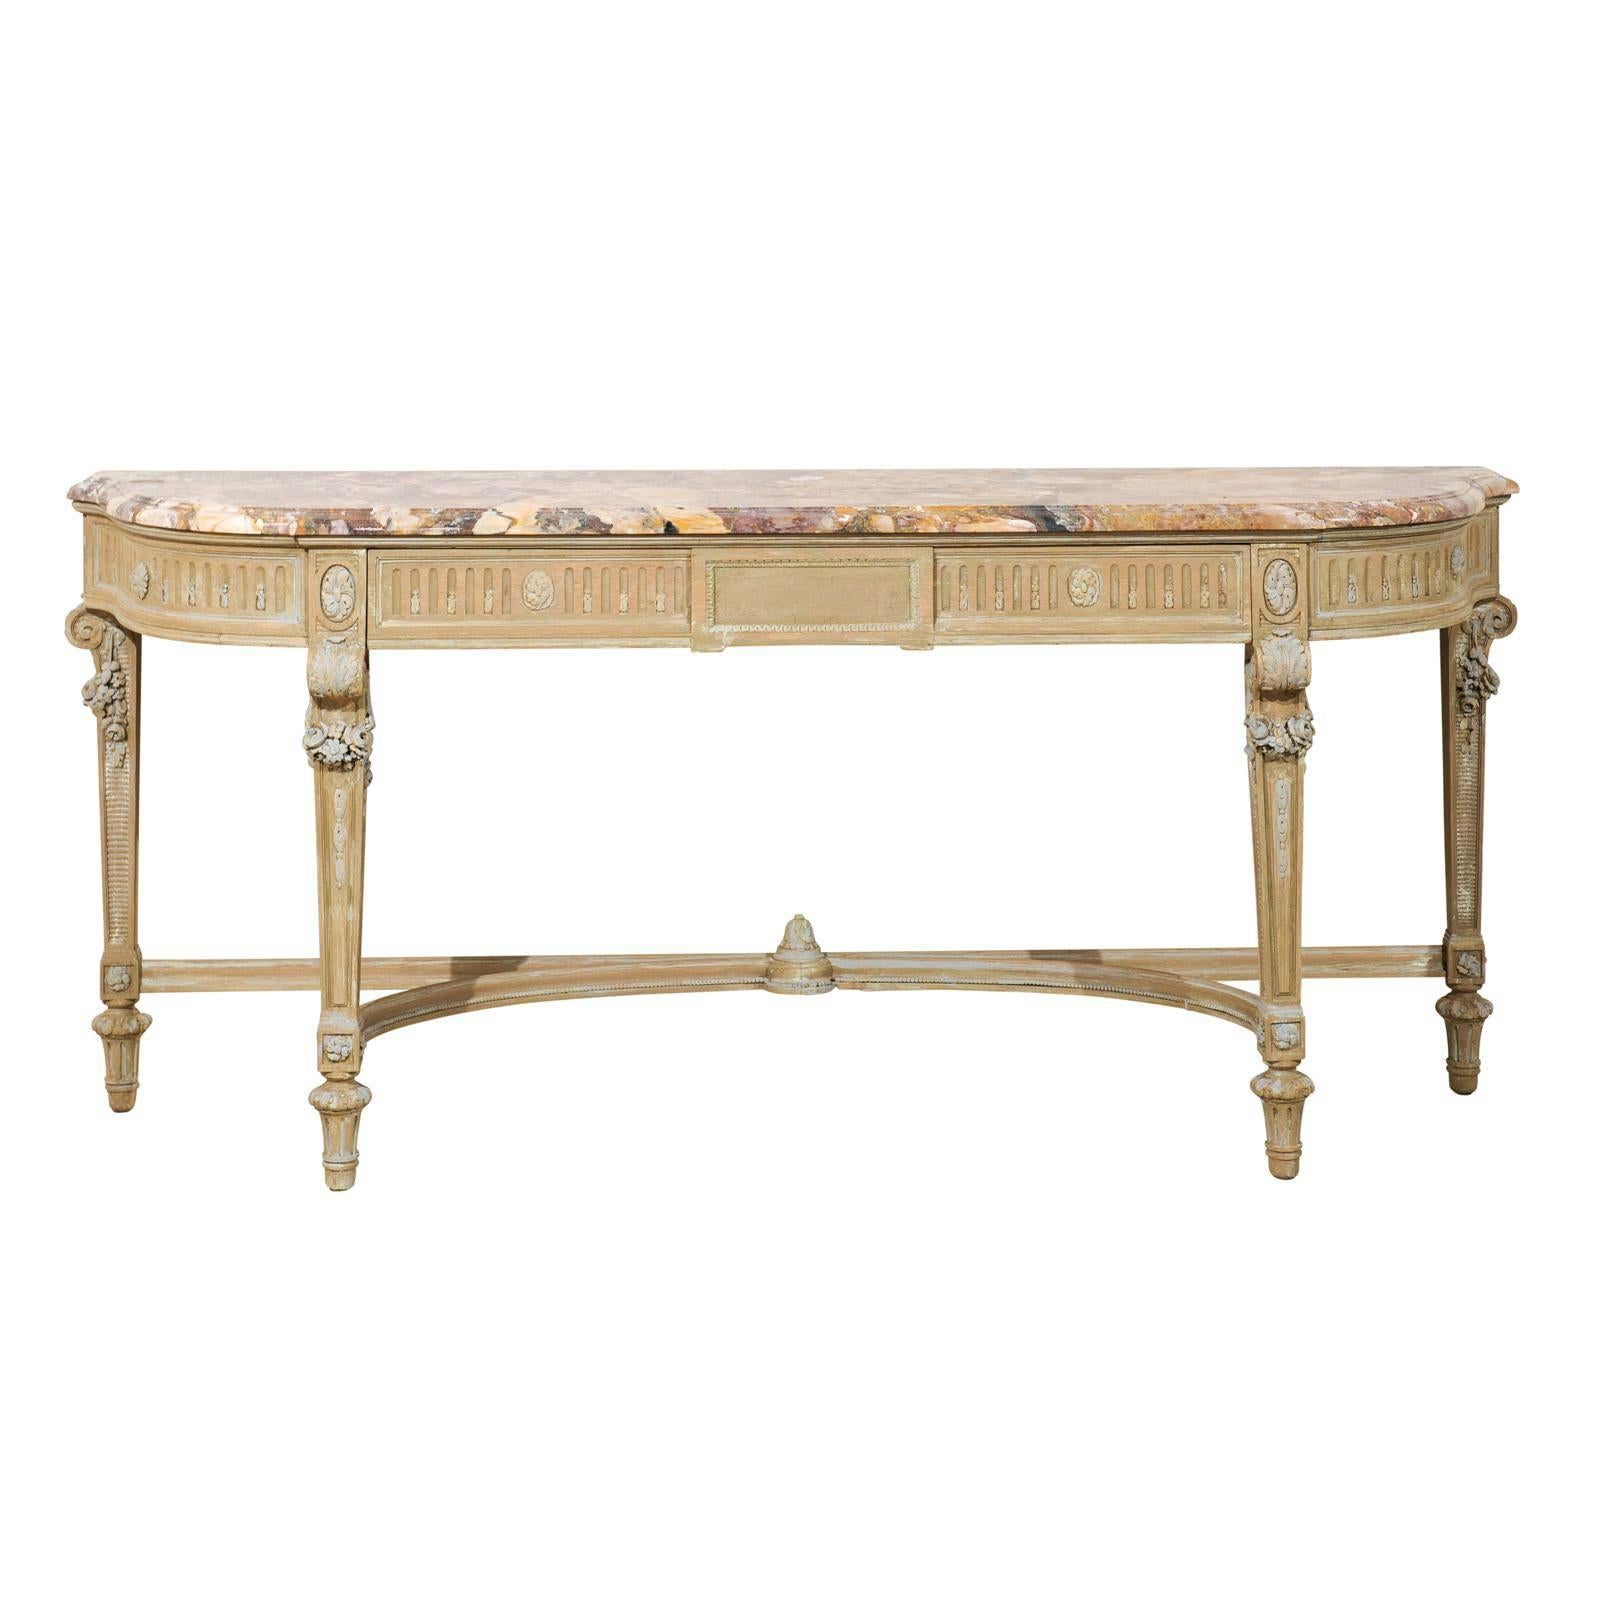 French Early 19th Century Wooden Console Table with Marble Top